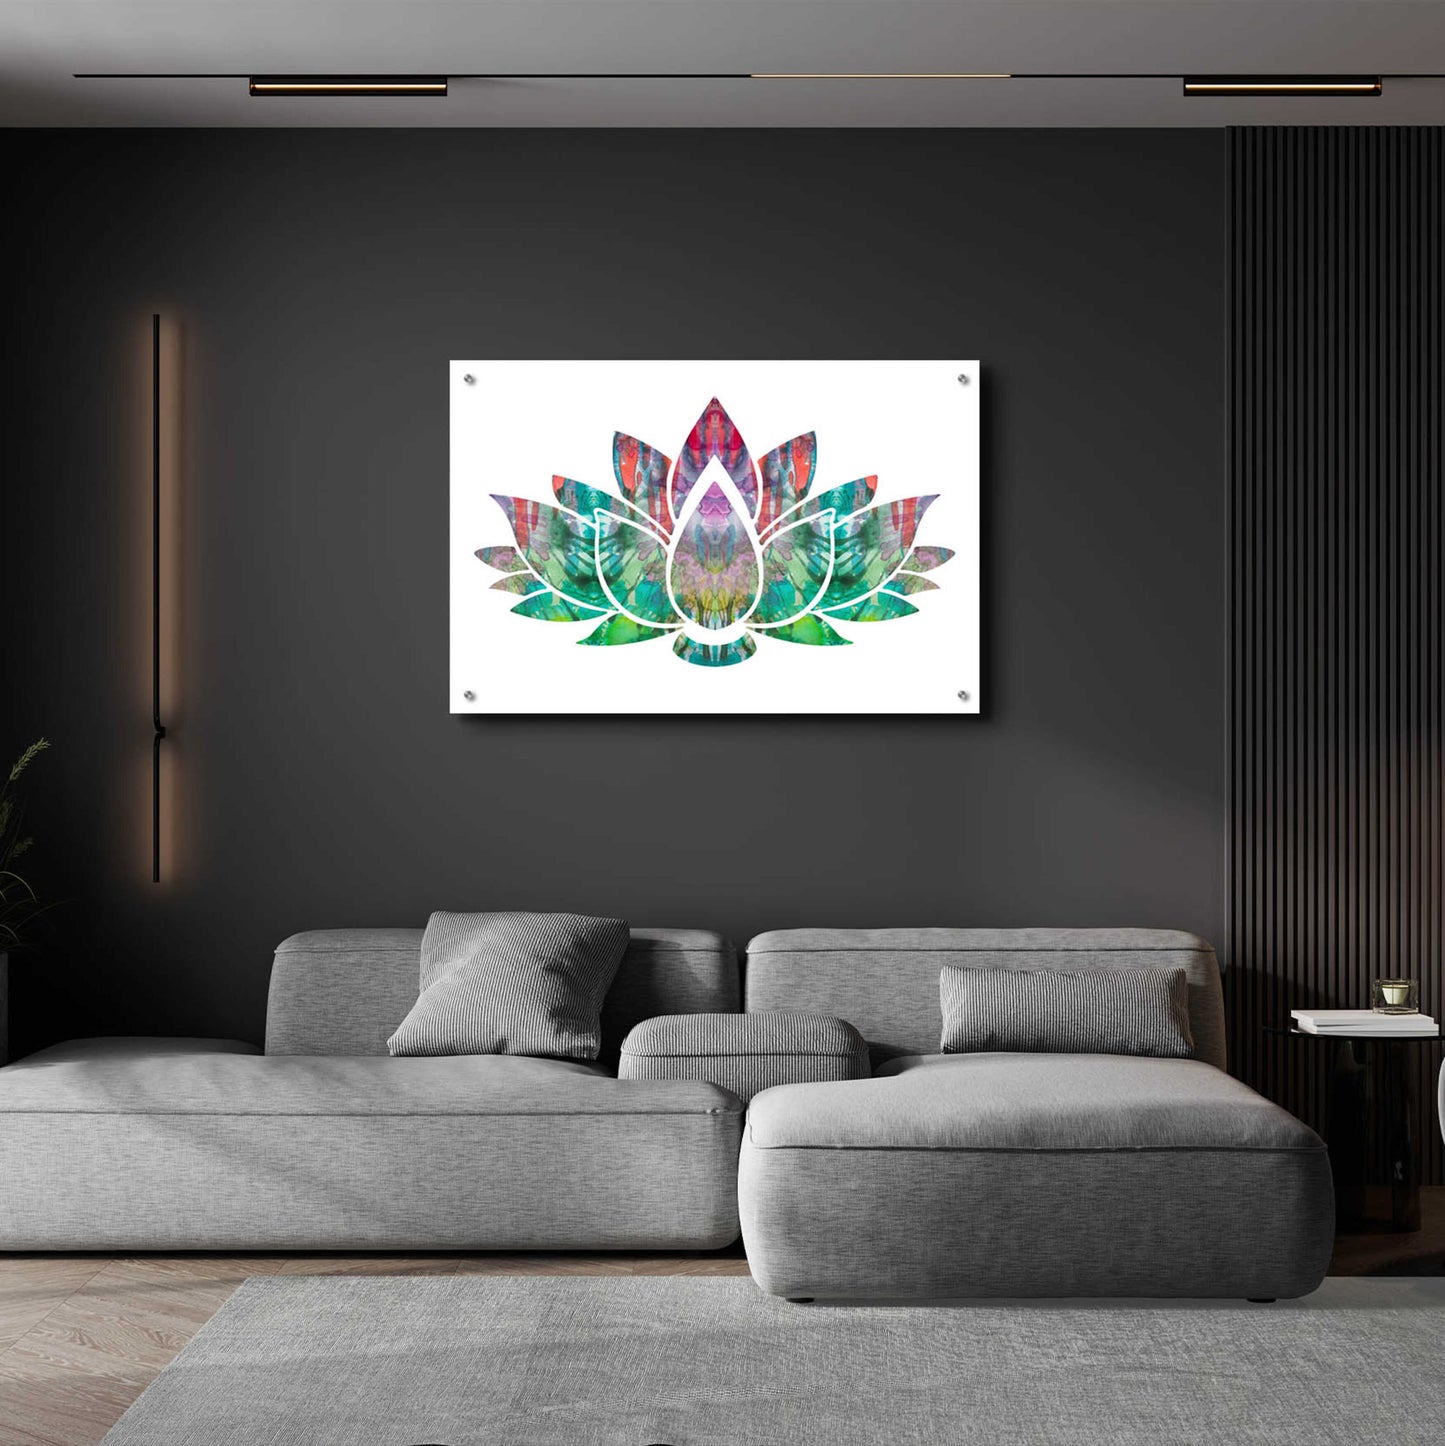 Epic Art 'Lotus' by Dean Russo, Acrylic Glass Wall Art,36x24